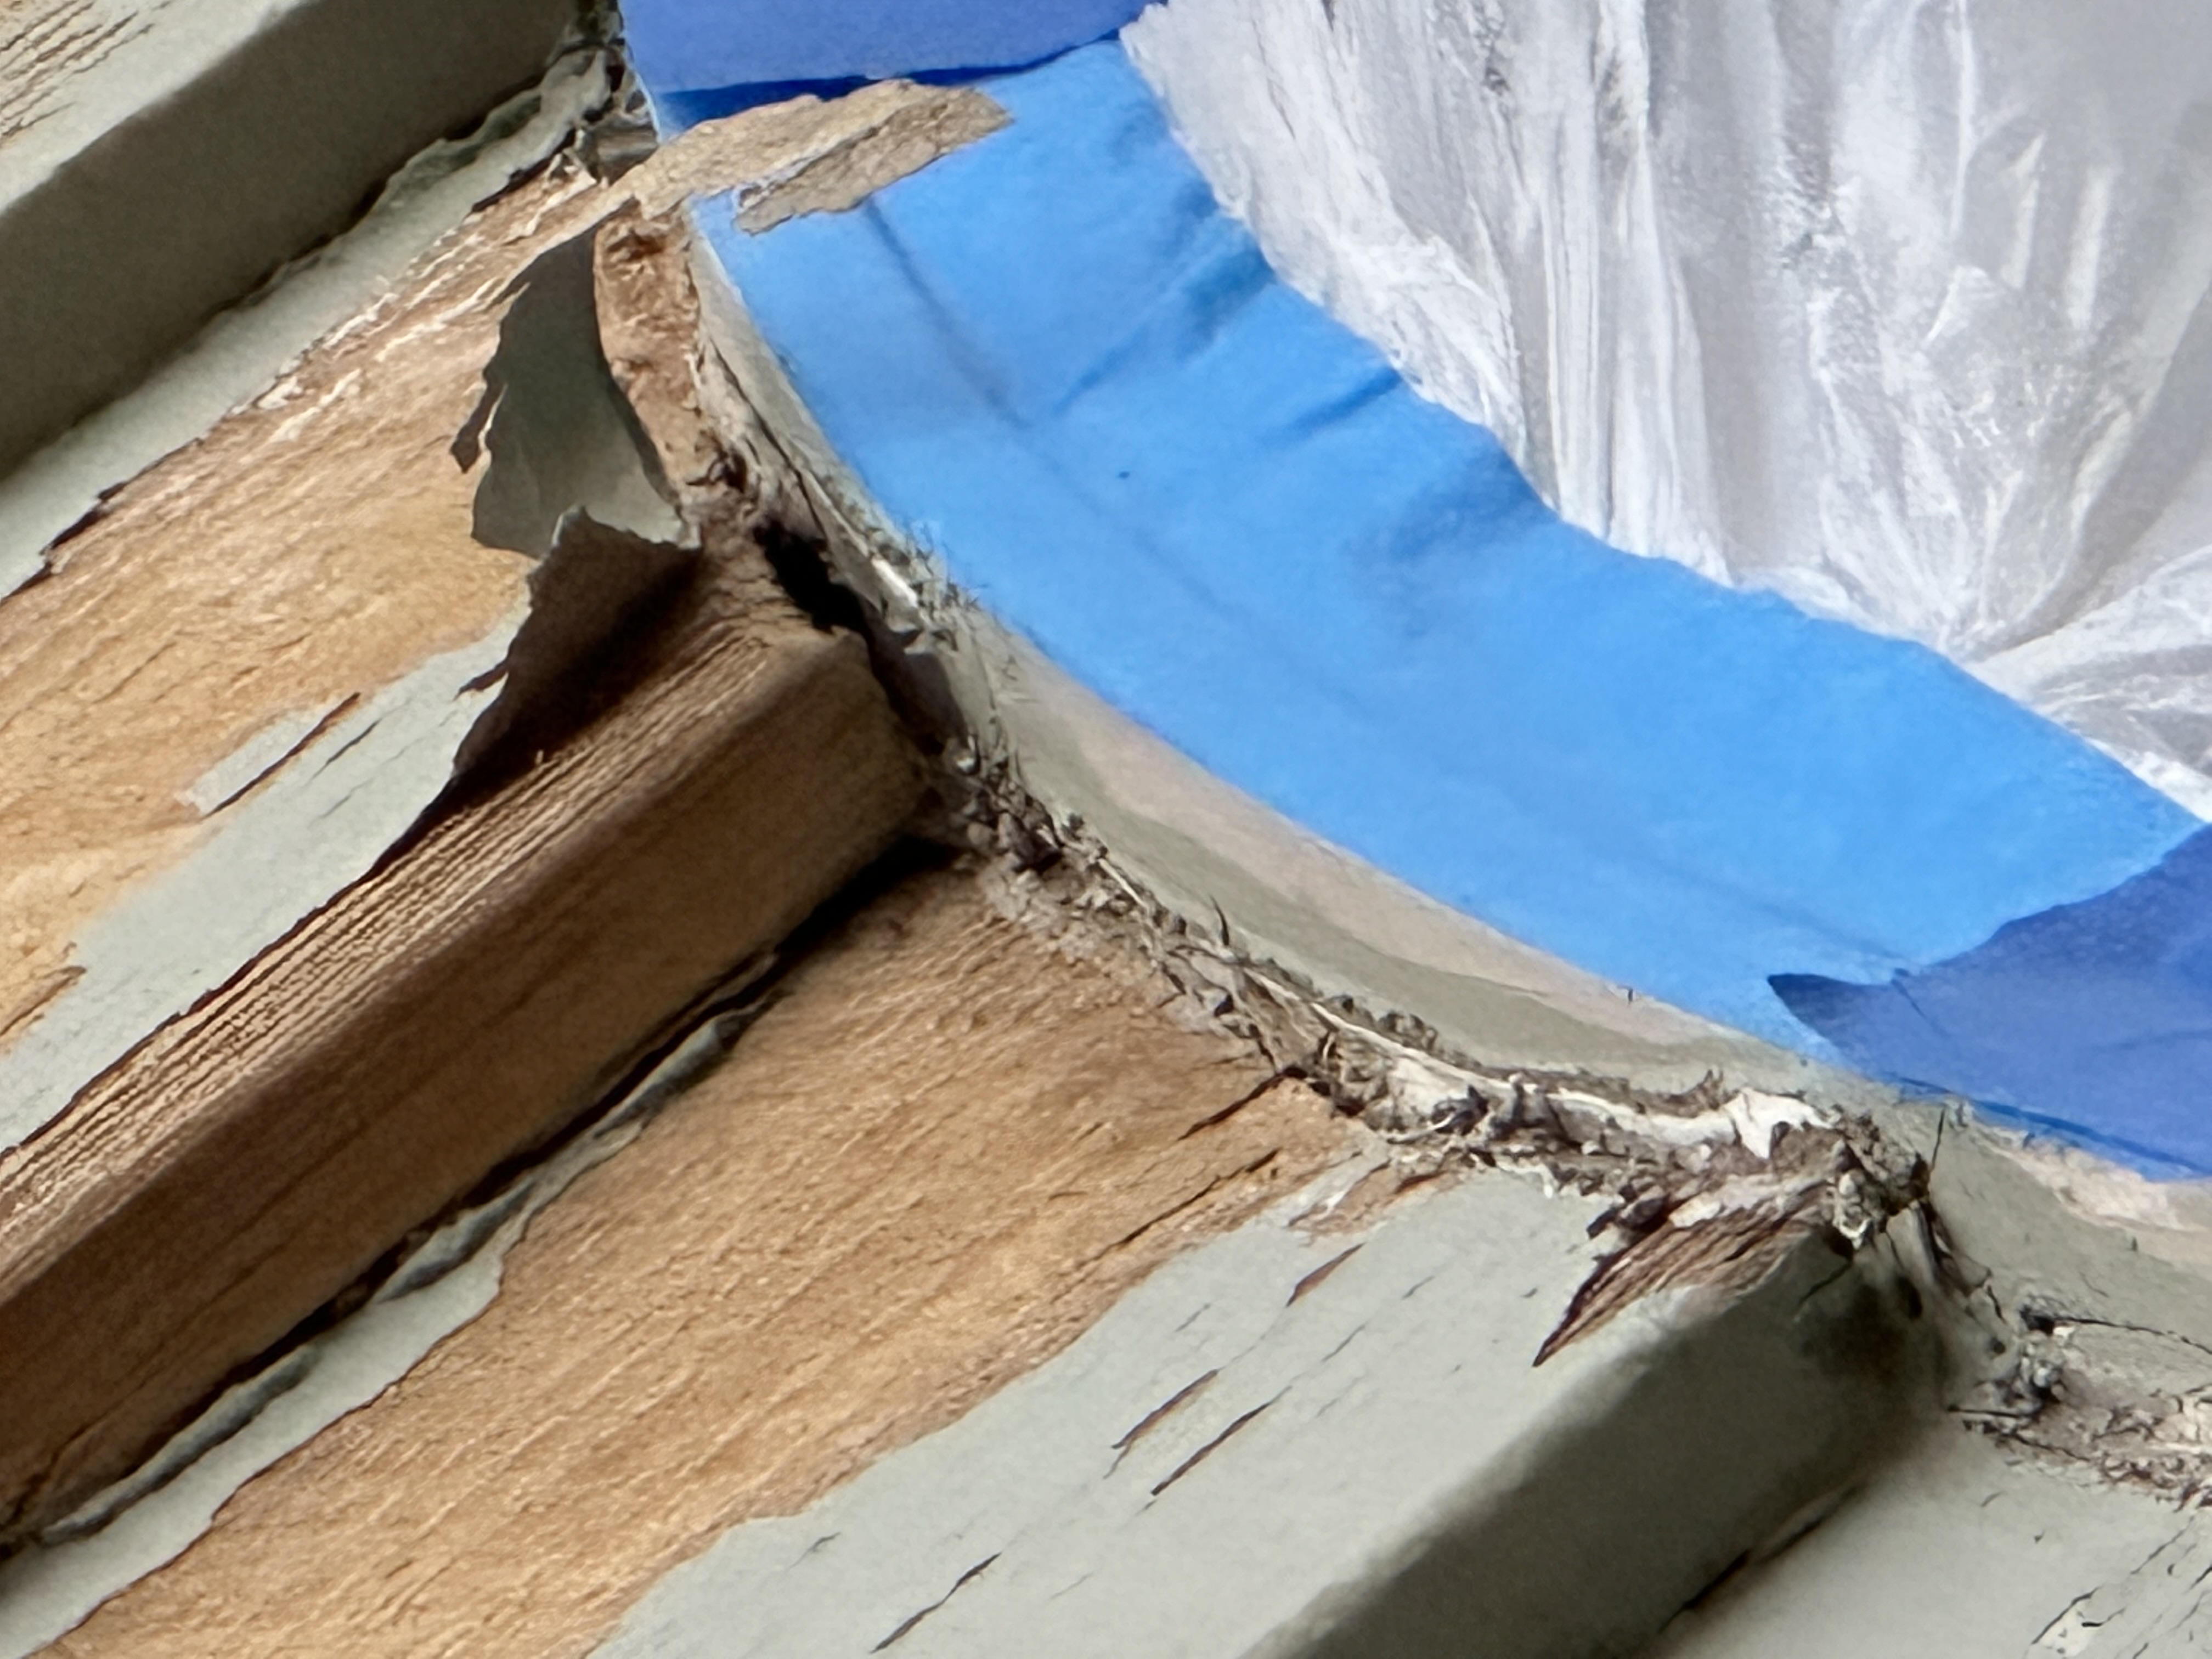 Loose paint not scraped off wood prior to painting